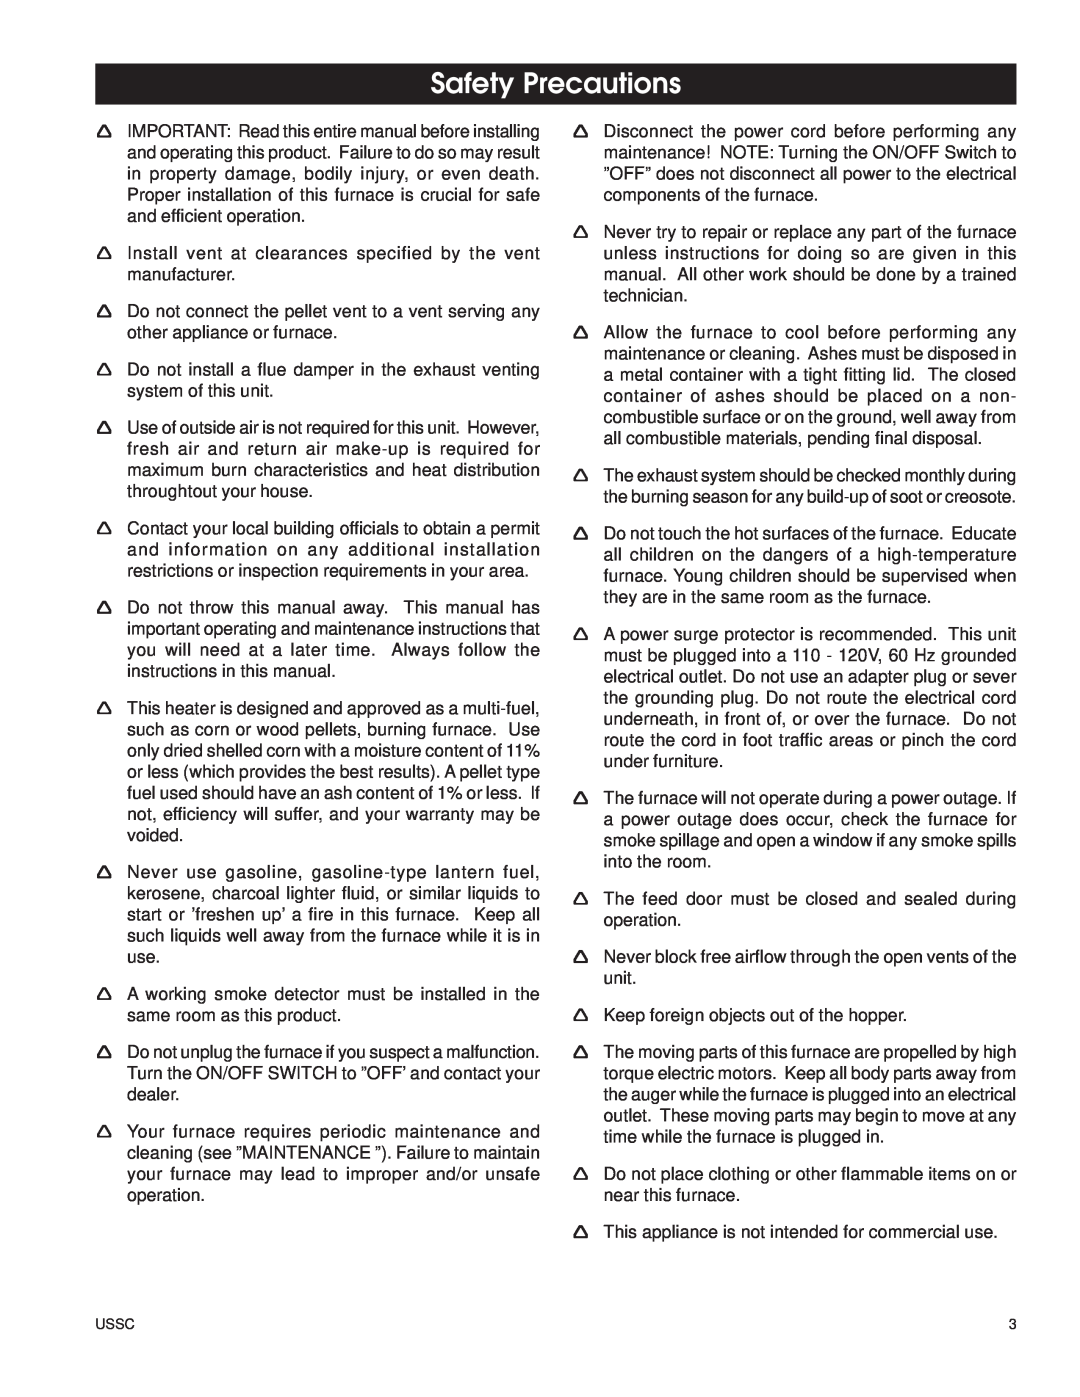 United States Stove 6110 owner manual Safety Precautions 